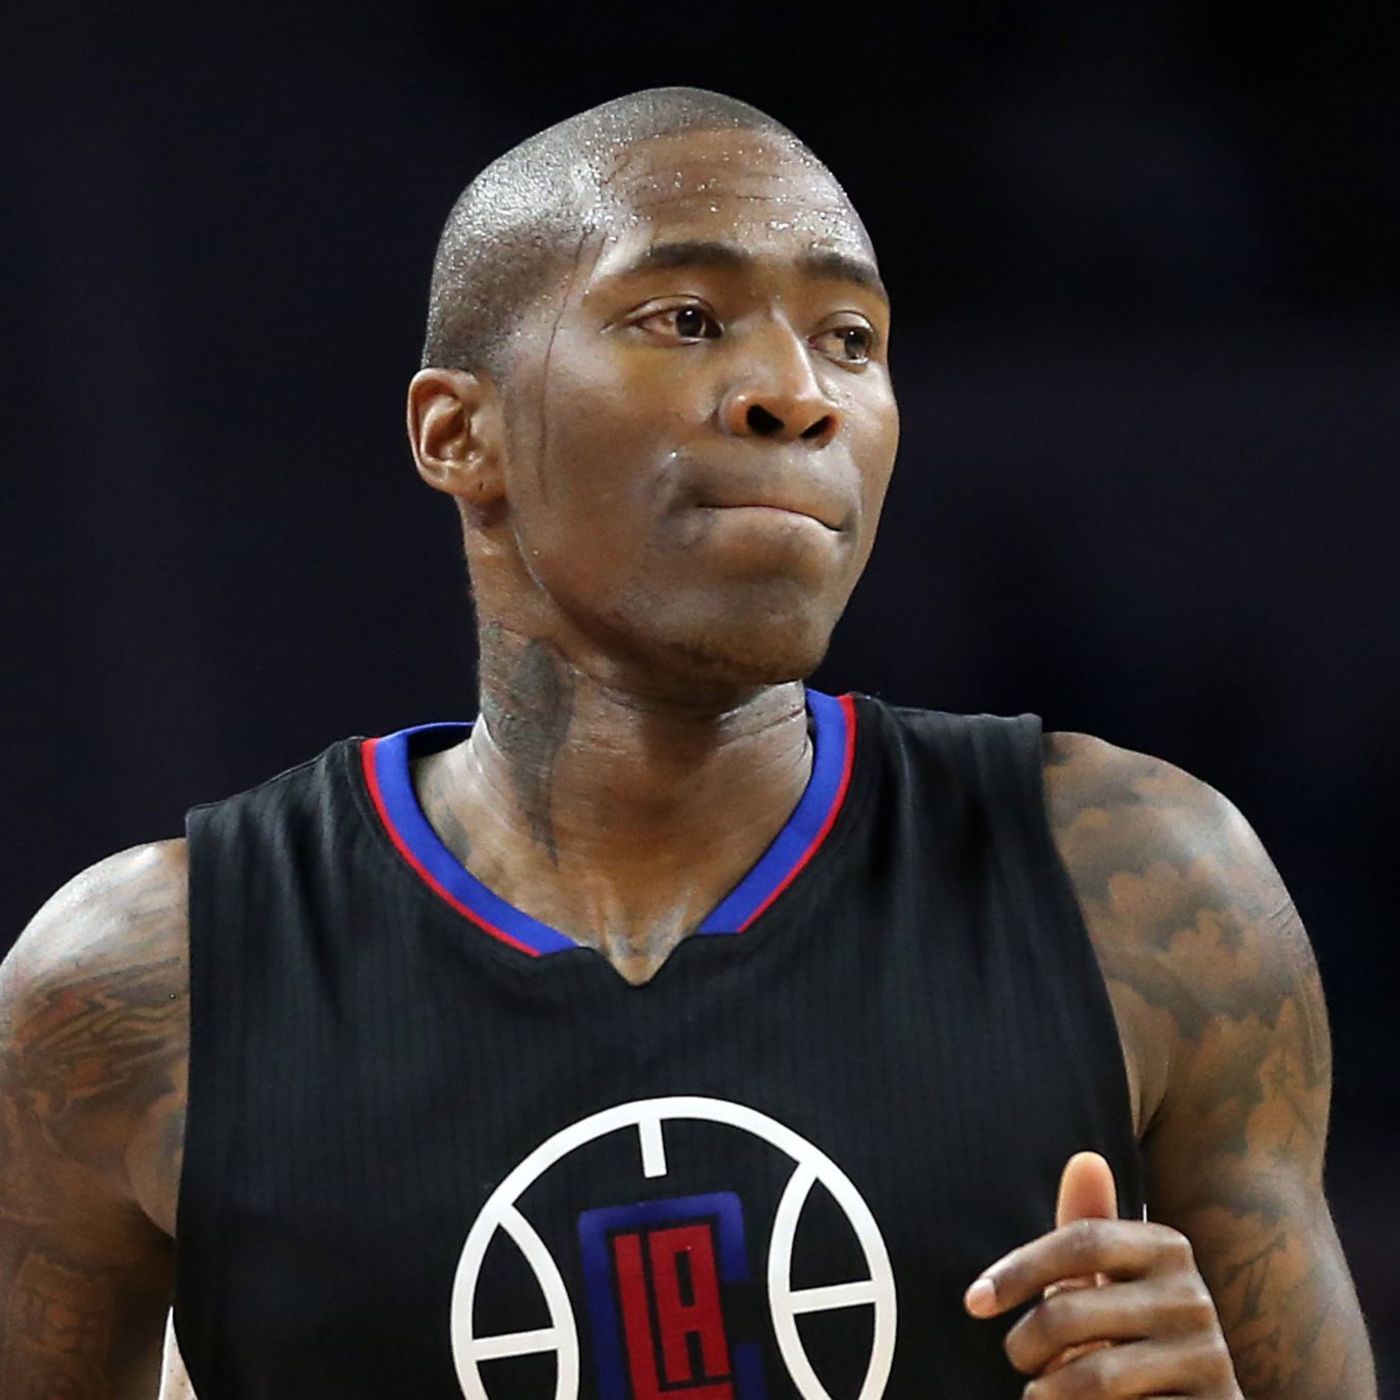 Jamal Crawford breaks down this year's free agency class